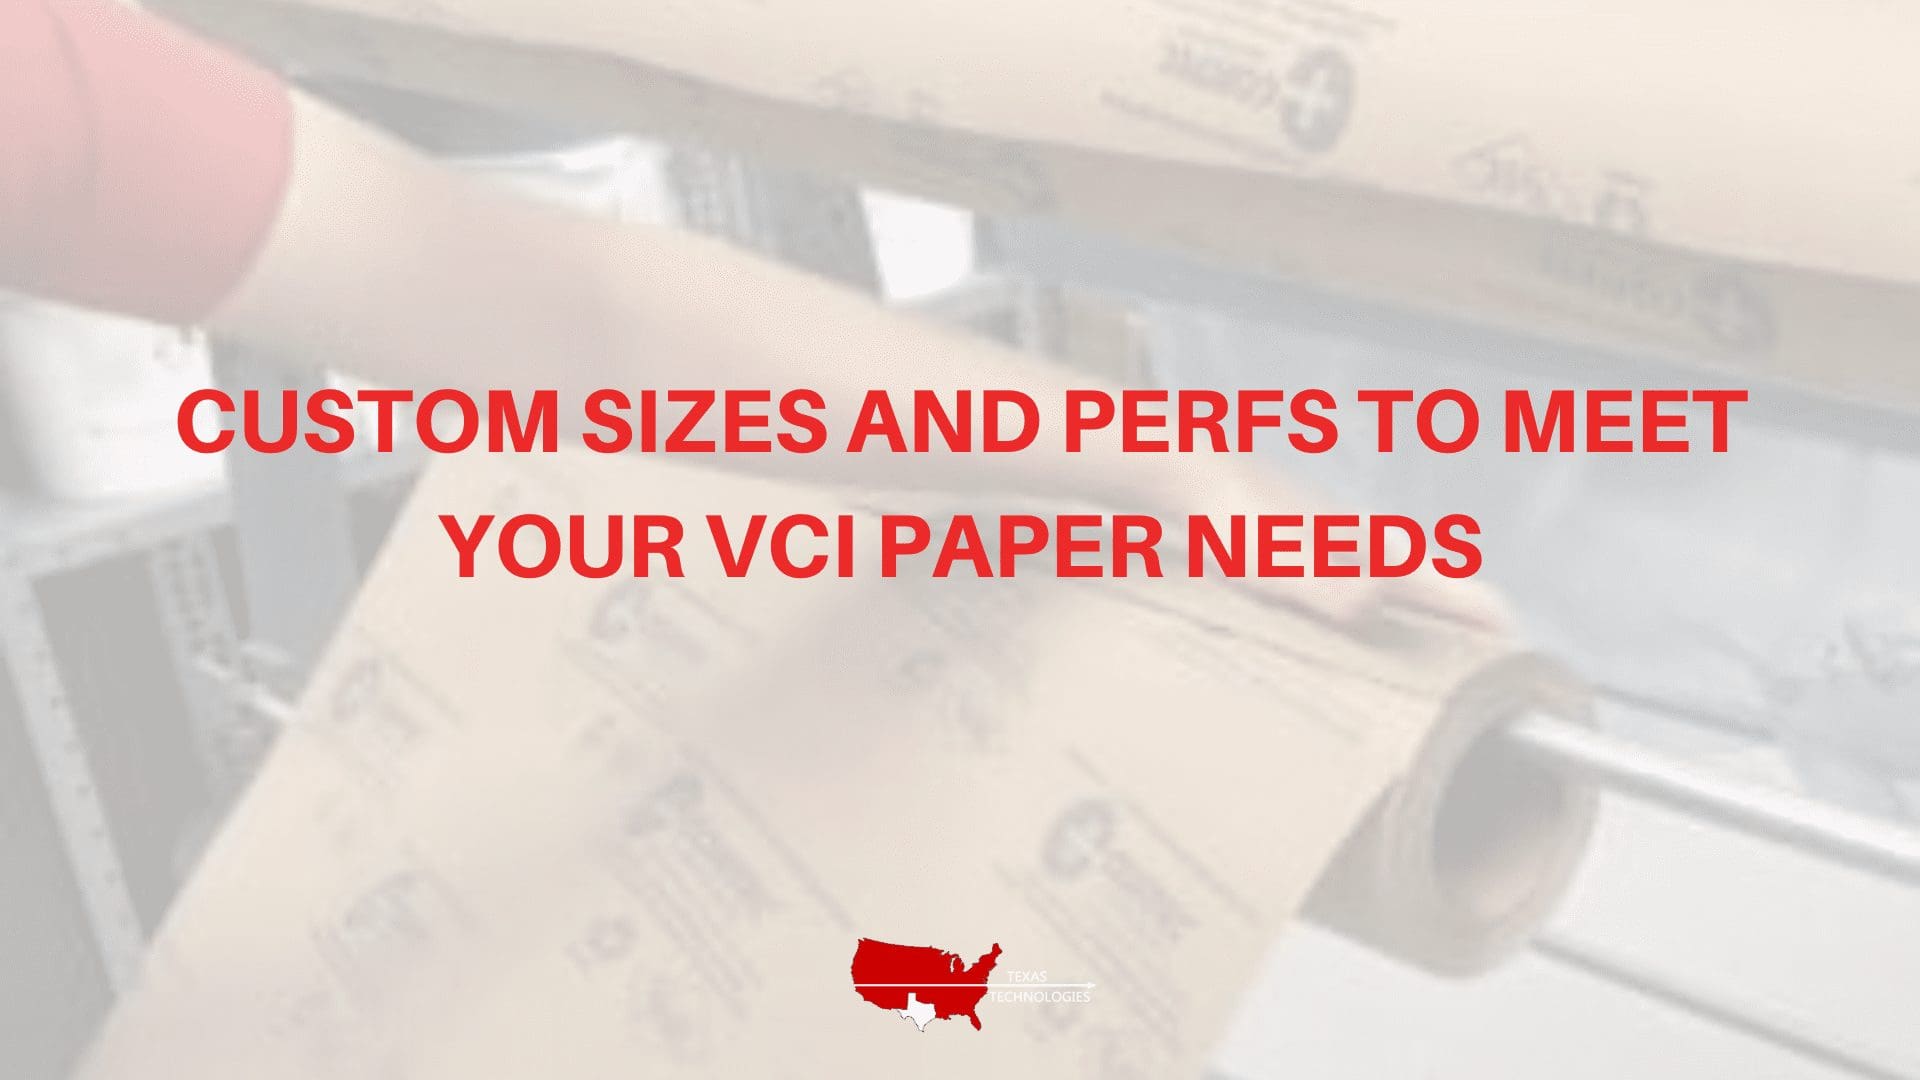 Custom Sizes and Perfs to Meet Your VCI Paper Needs